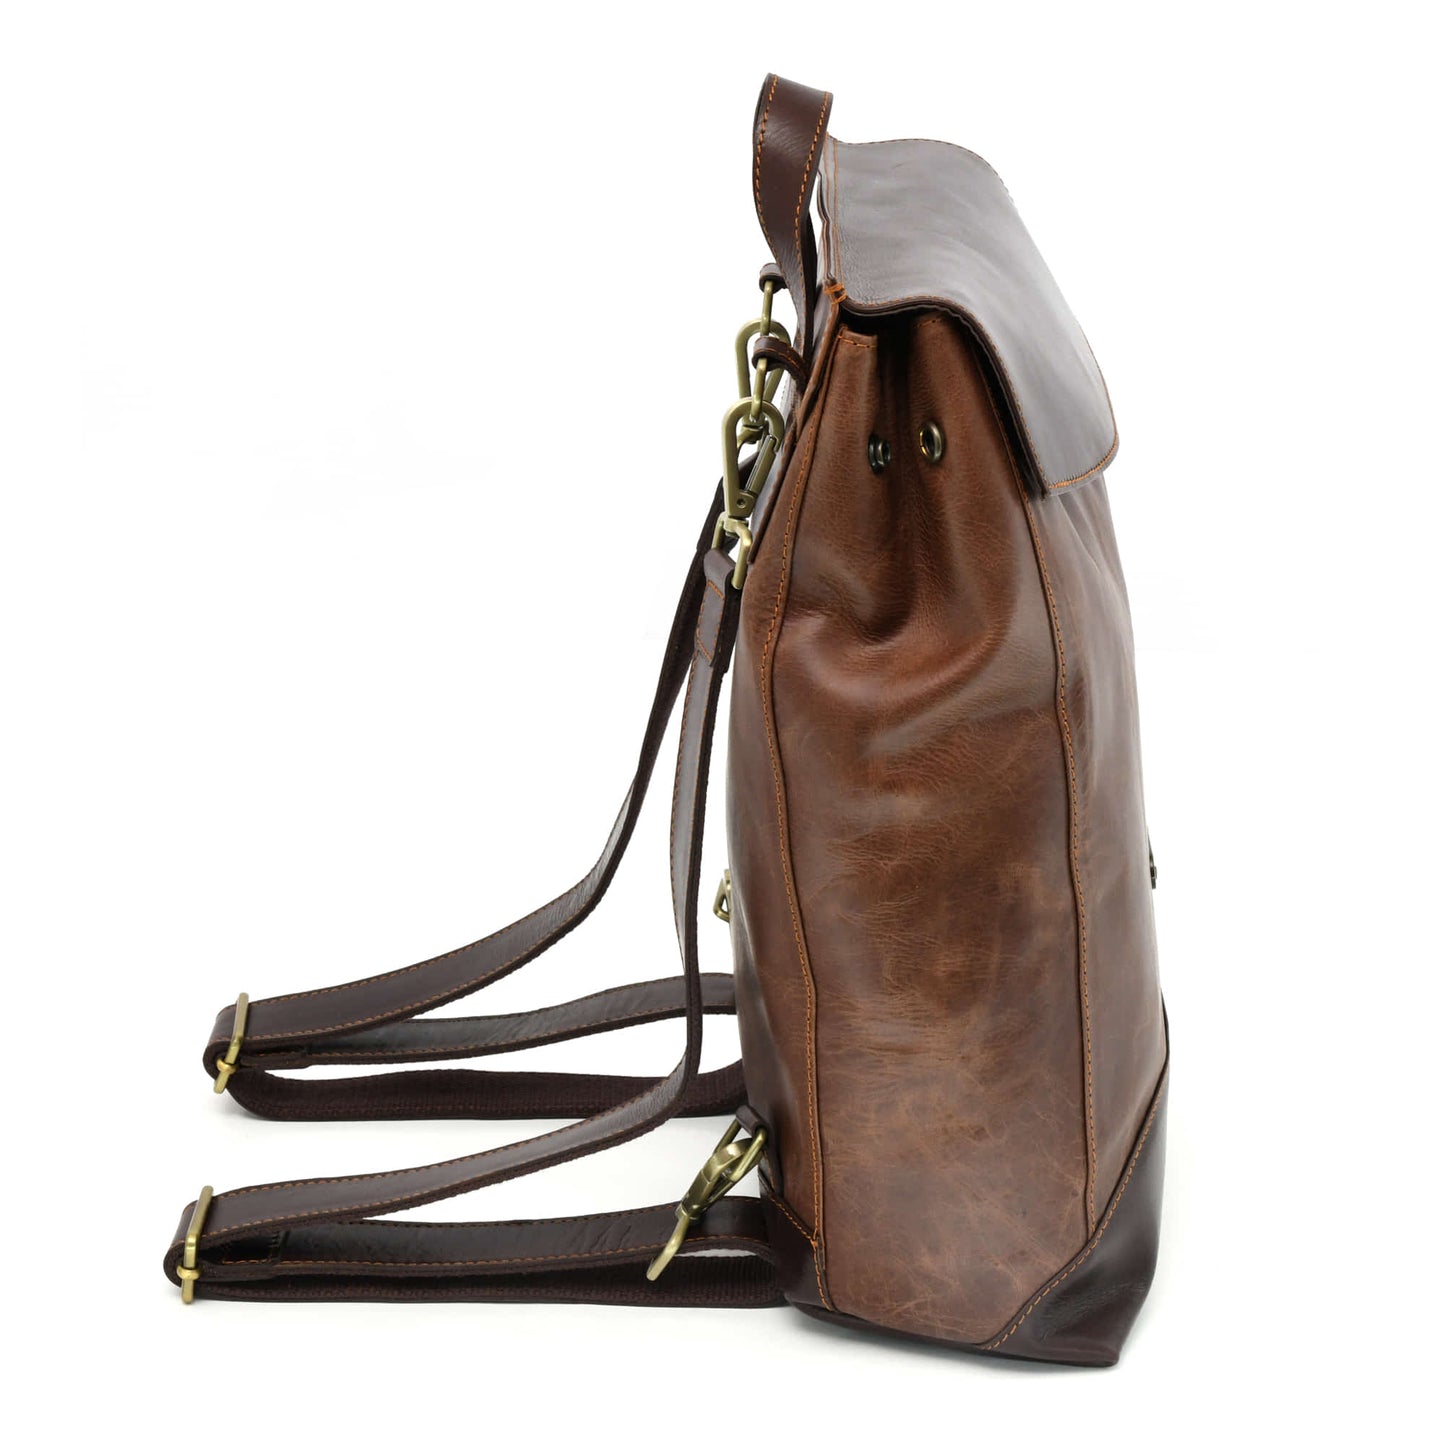 Style n Craft 392153 Backpack in Light & Dark Brown Combination Full Grain Leather - Side view showing the side of the bag in light brown crunch effect, the snap button & the top handle, top flap and bottom of the bag in dark brown and the detachable & adjustable shoulder straps in dark brown